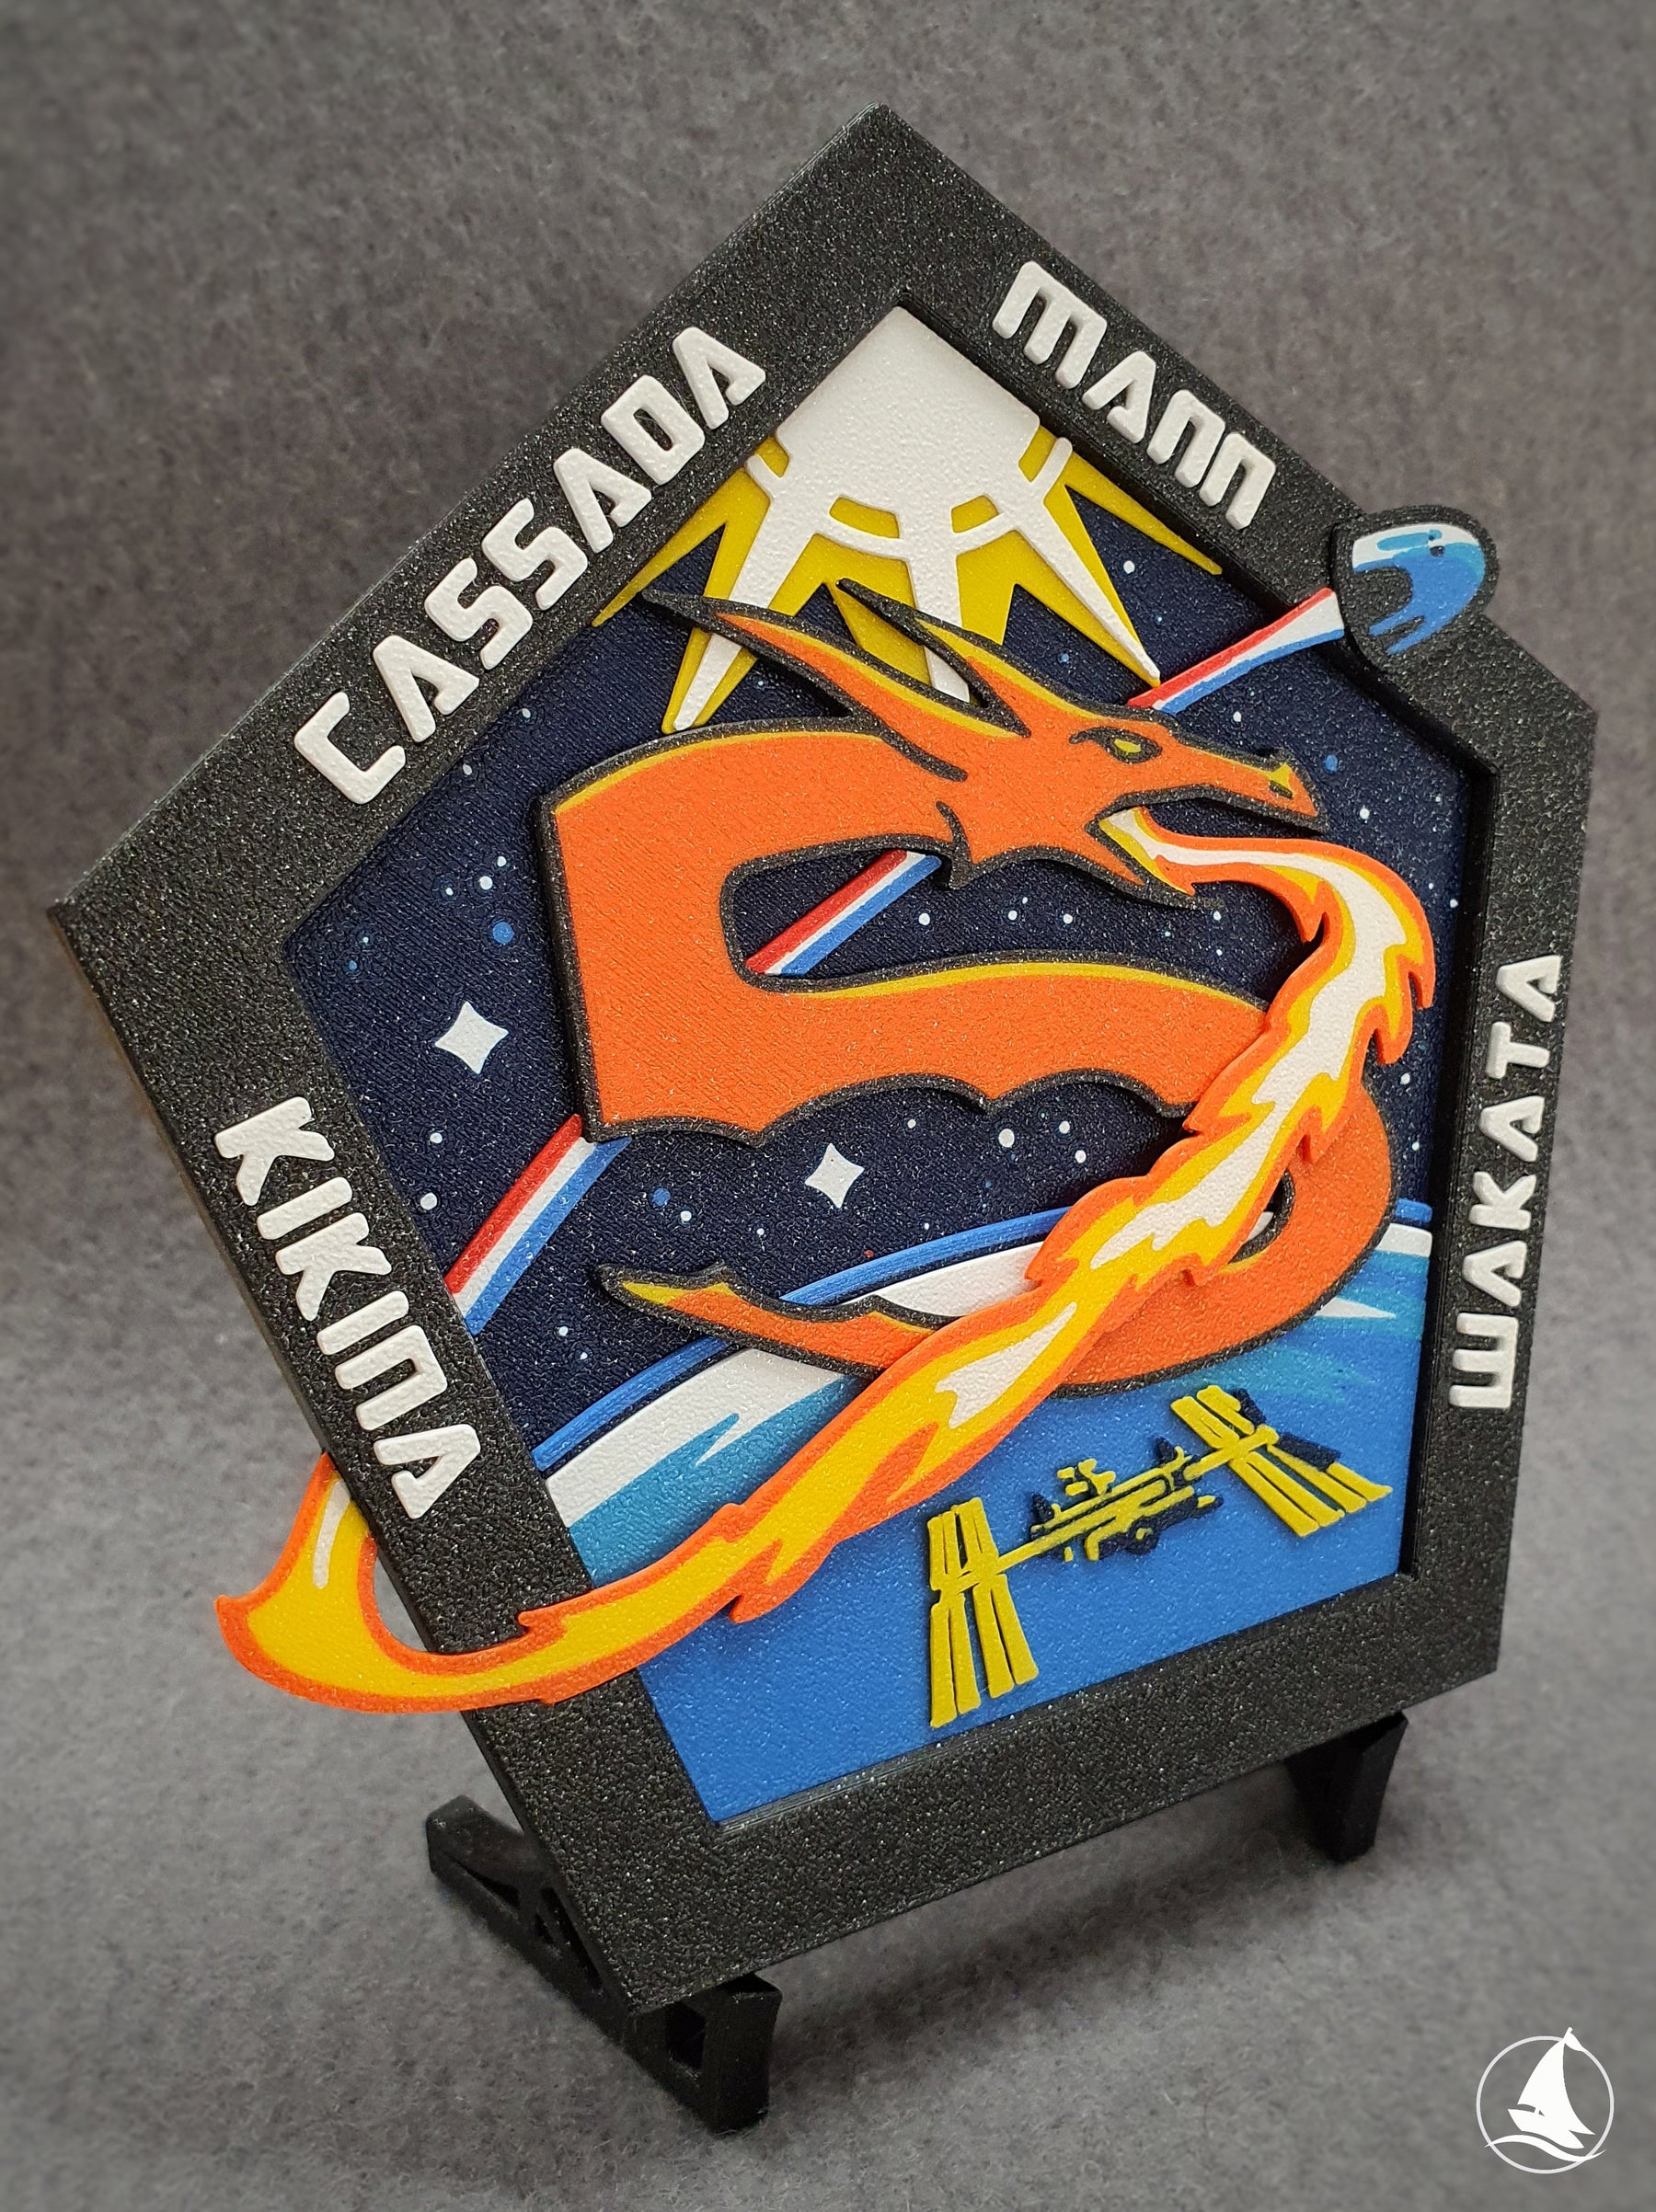 SpaceX - Crew 5 Patch